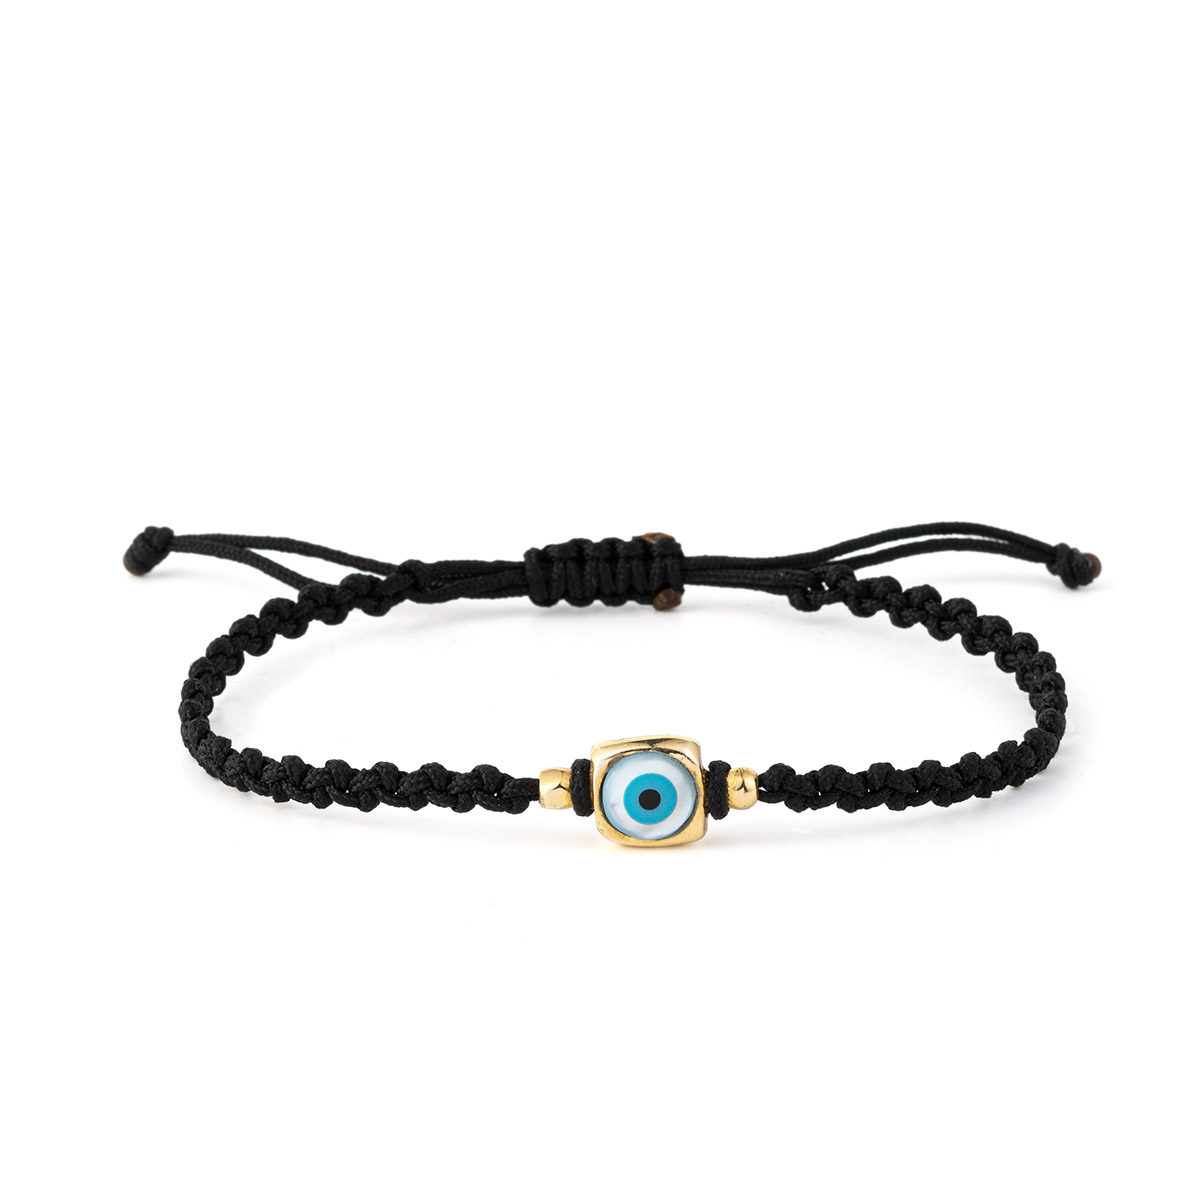 Square Eye Black Macrame Bracelet – 925 Sterling Silver and Gold Plated